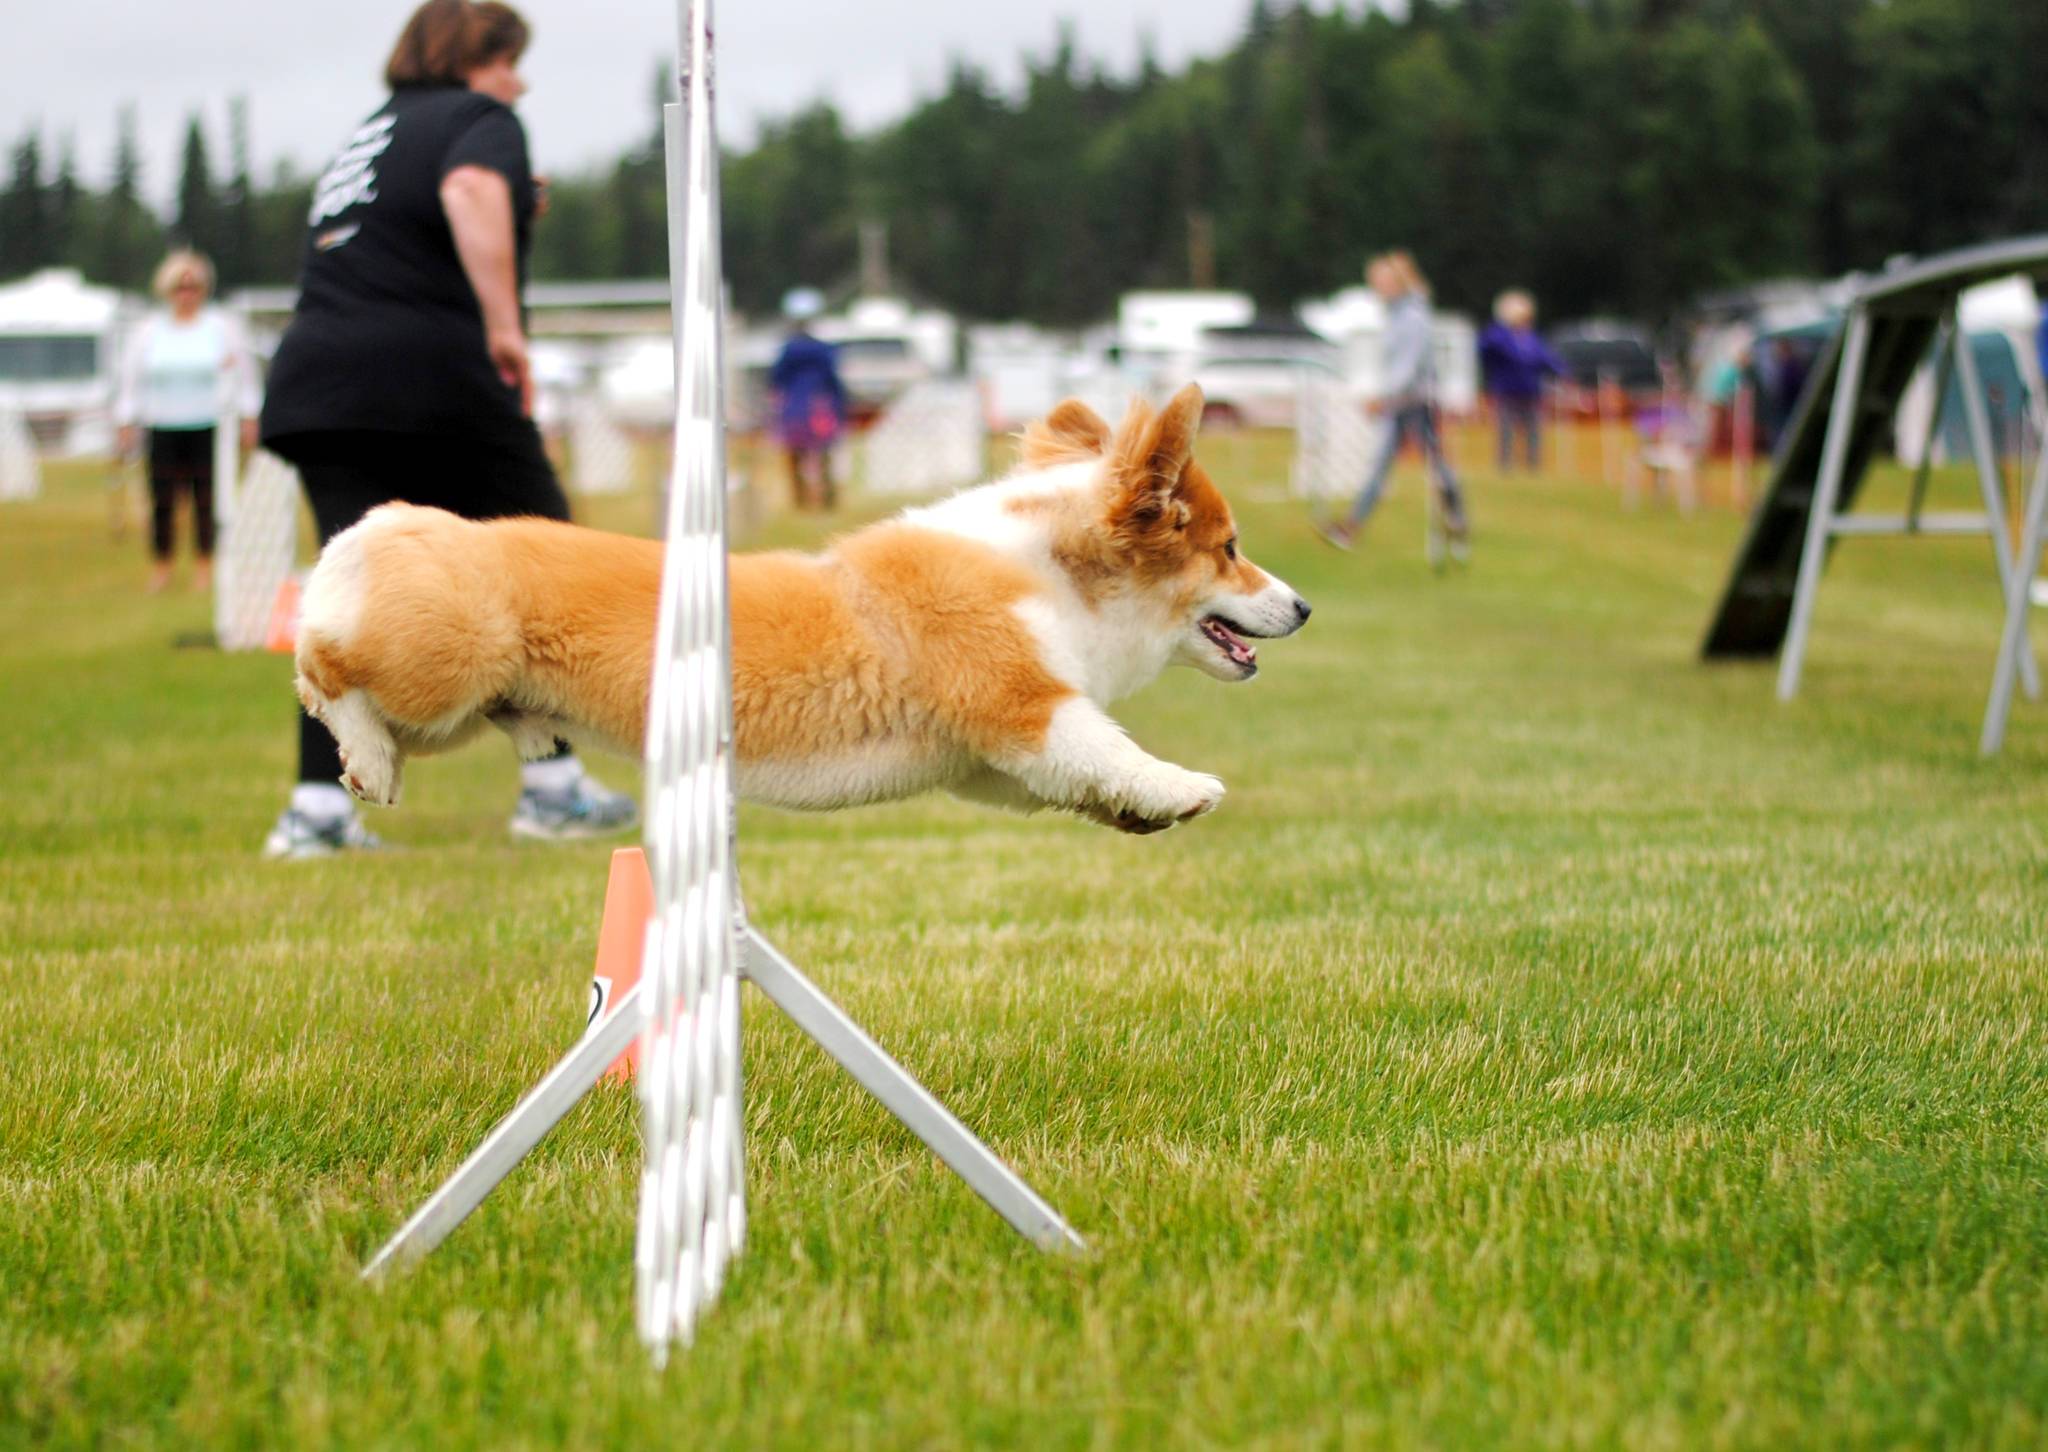 A corgi competes in the agility competition during the Kenai Kennel Club’s dog show Saturday, July 15, 2017 at Skyview Middle School in Soldotna, Alaska. (Photo by Kat Sorensen/Peninsula Clarion)